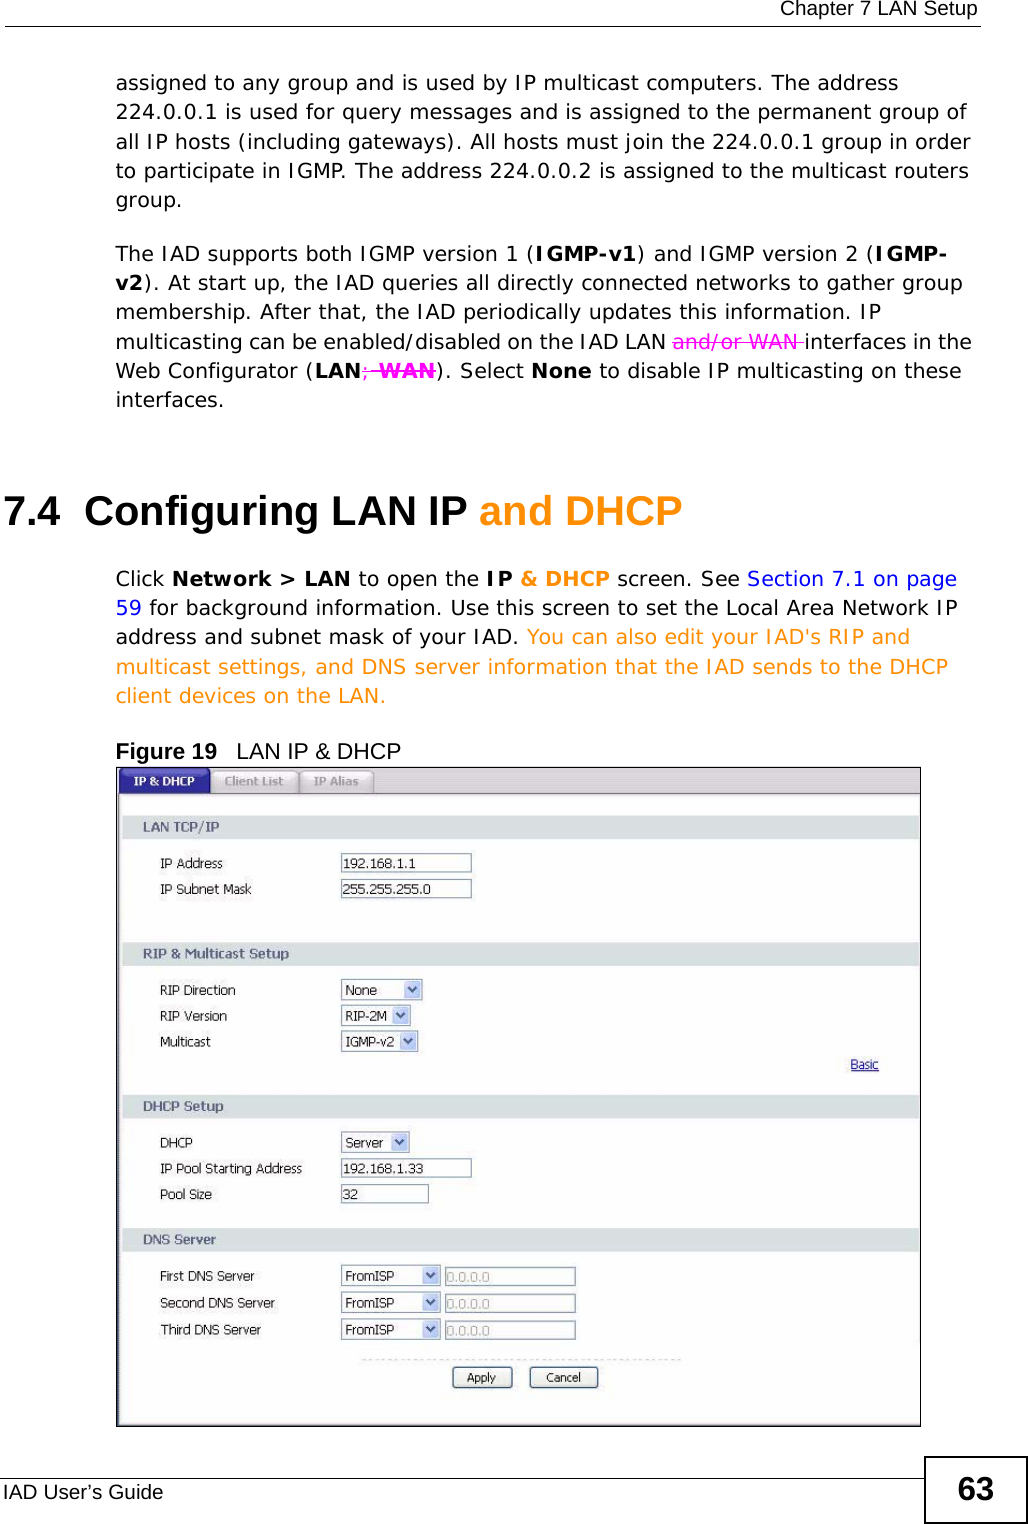  Chapter 7 LAN SetupIAD User’s Guide 63assigned to any group and is used by IP multicast computers. The address 224.0.0.1 is used for query messages and is assigned to the permanent group of all IP hosts (including gateways). All hosts must join the 224.0.0.1 group in order to participate in IGMP. The address 224.0.0.2 is assigned to the multicast routers group. The IAD supports both IGMP version 1 (IGMP-v1) and IGMP version 2 (IGMP-v2). At start up, the IAD queries all directly connected networks to gather group membership. After that, the IAD periodically updates this information. IP multicasting can be enabled/disabled on the IAD LAN and/or WAN interfaces in the Web Configurator (LAN; WAN). Select None to disable IP multicasting on these interfaces.7.4  Configuring LAN IP and DHCP Click Network &gt; LAN to open the IP &amp; DHCP screen. See Section 7.1 on page 59 for background information. Use this screen to set the Local Area Network IP address and subnet mask of your IAD. You can also edit your IAD&apos;s RIP and multicast settings, and DNS server information that the IAD sends to the DHCP client devices on the LAN.Figure 19   LAN IP &amp; DHCP 